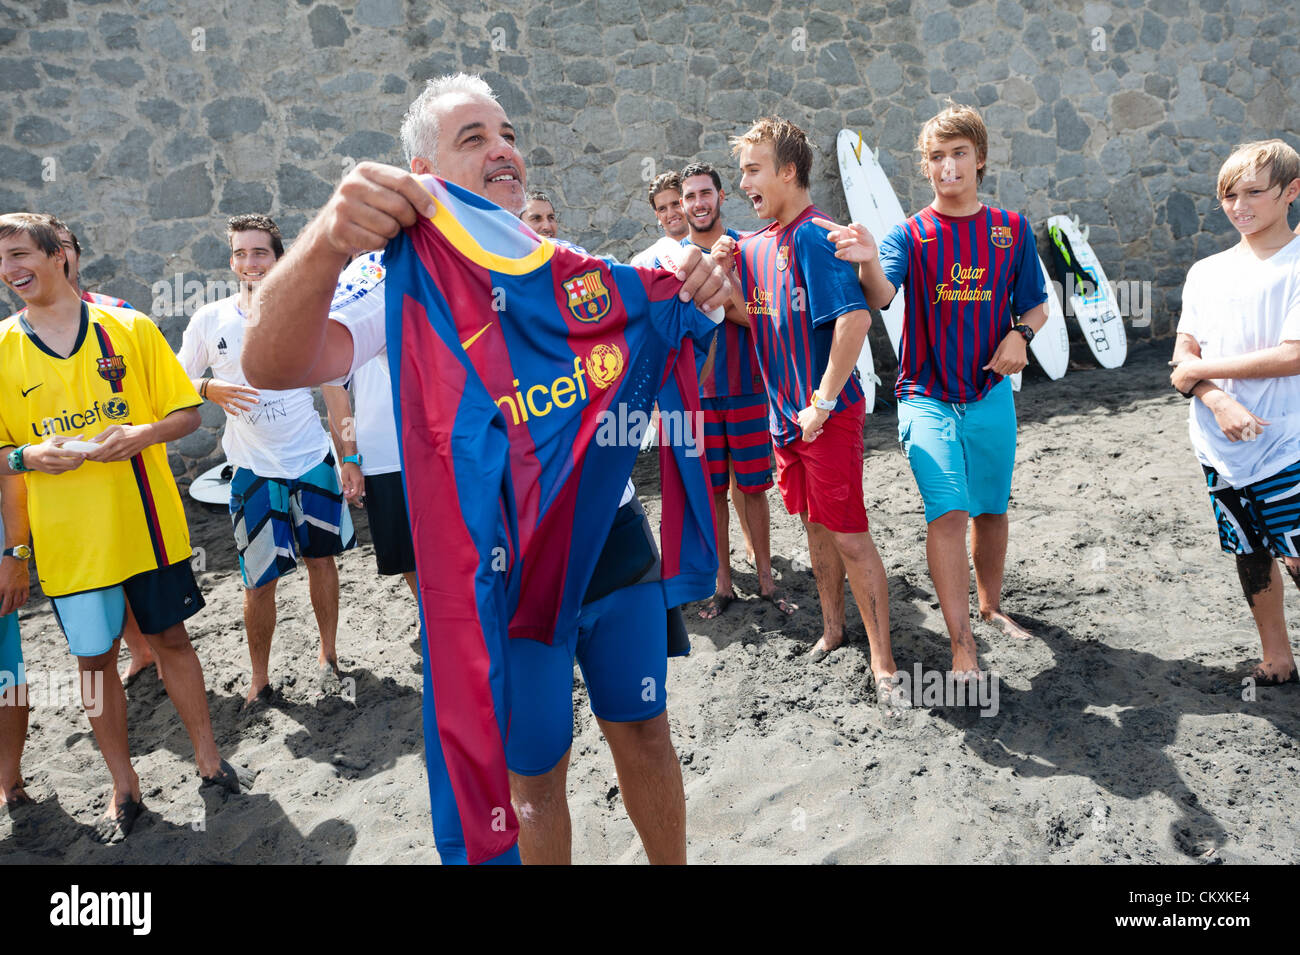 LAS PALMAS, CANARIAS ISLANDS, SPAIN–AUGUST 29, 2012: Unidentified young surfers from University Surf School and Surf Camp Las Palmas during an informal competition, formed as an football match with 11 surfers in each team, one team is wearing T-shirts from football club F.C. Barcelona, the other one from Real Madrid. Stock Photo